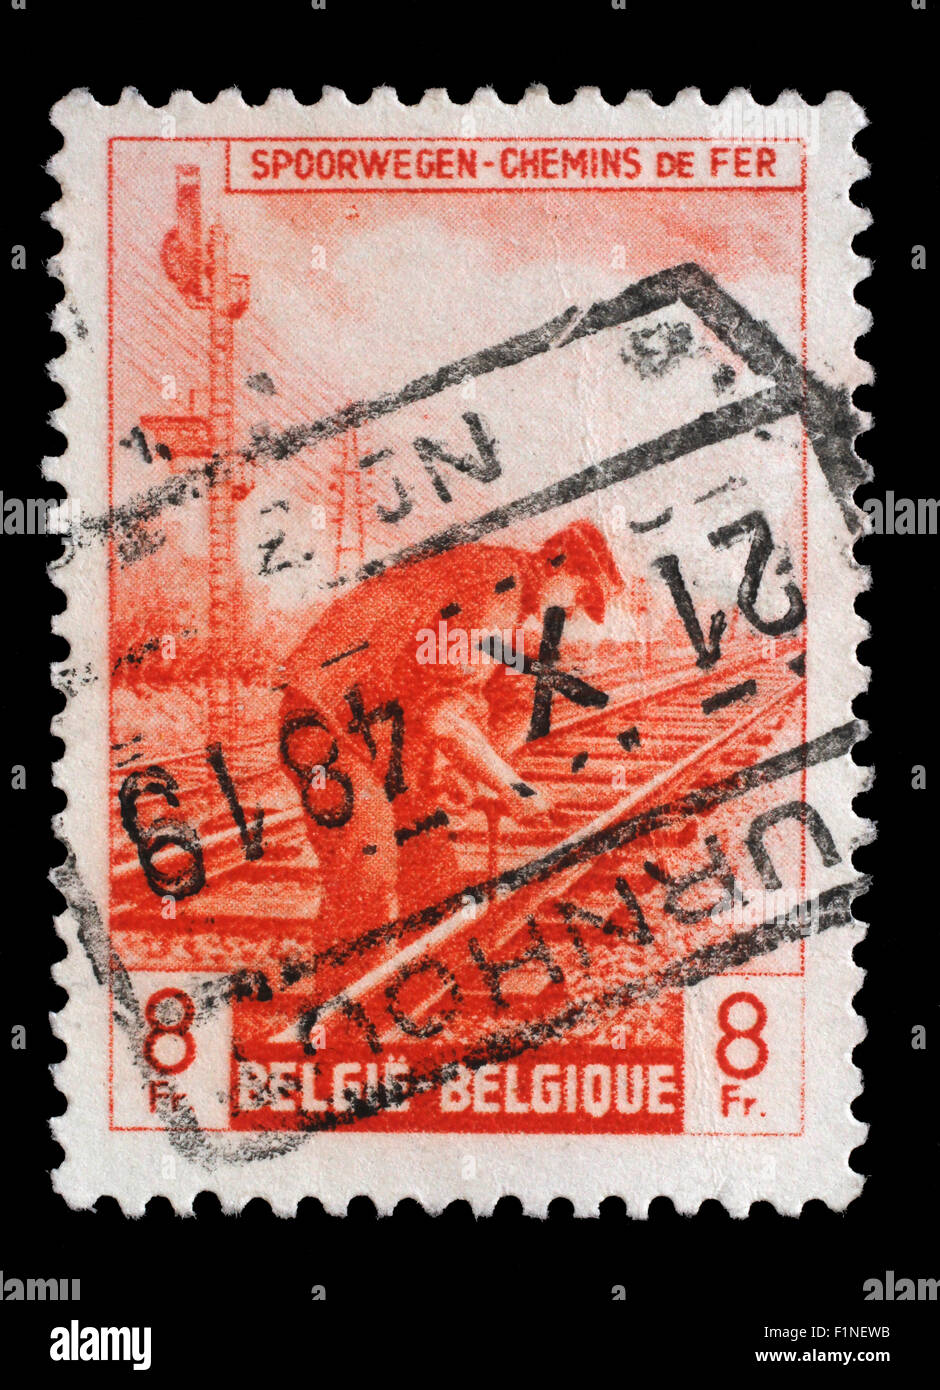 Stamp printed in Belgium shows Railway Worker from The Railway Company at Work issue, circa 1945. Stock Photo